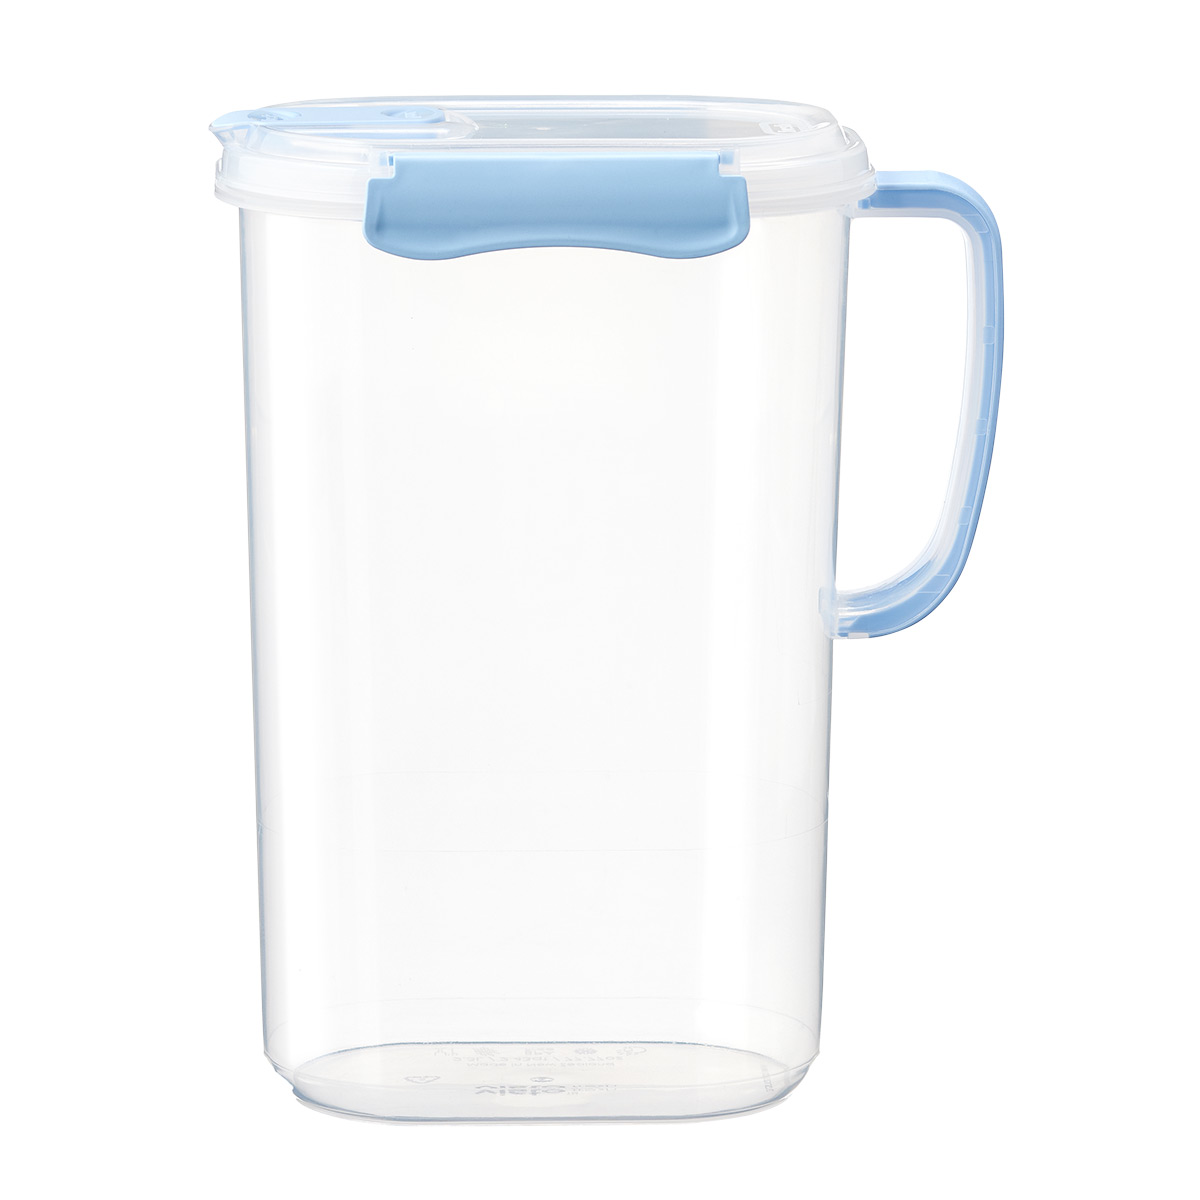 Light Blue 2.5 qt. Drink Pitcher | The Container Store